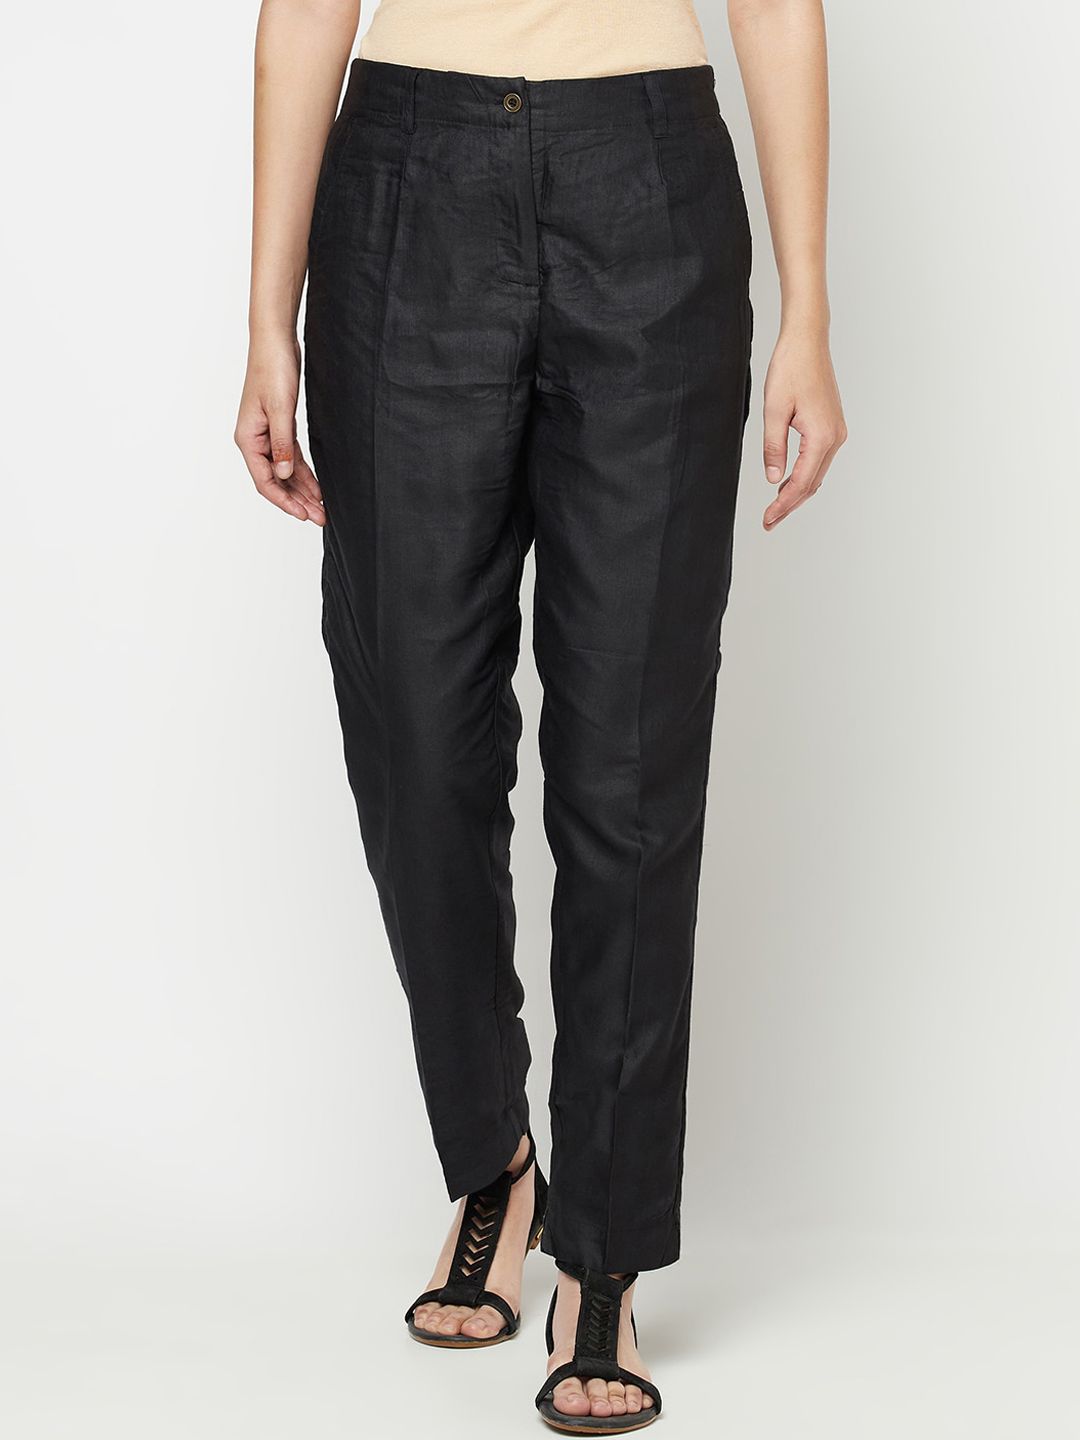 Fabindia Women Black Slim Fit Pleated Trousers Price in India